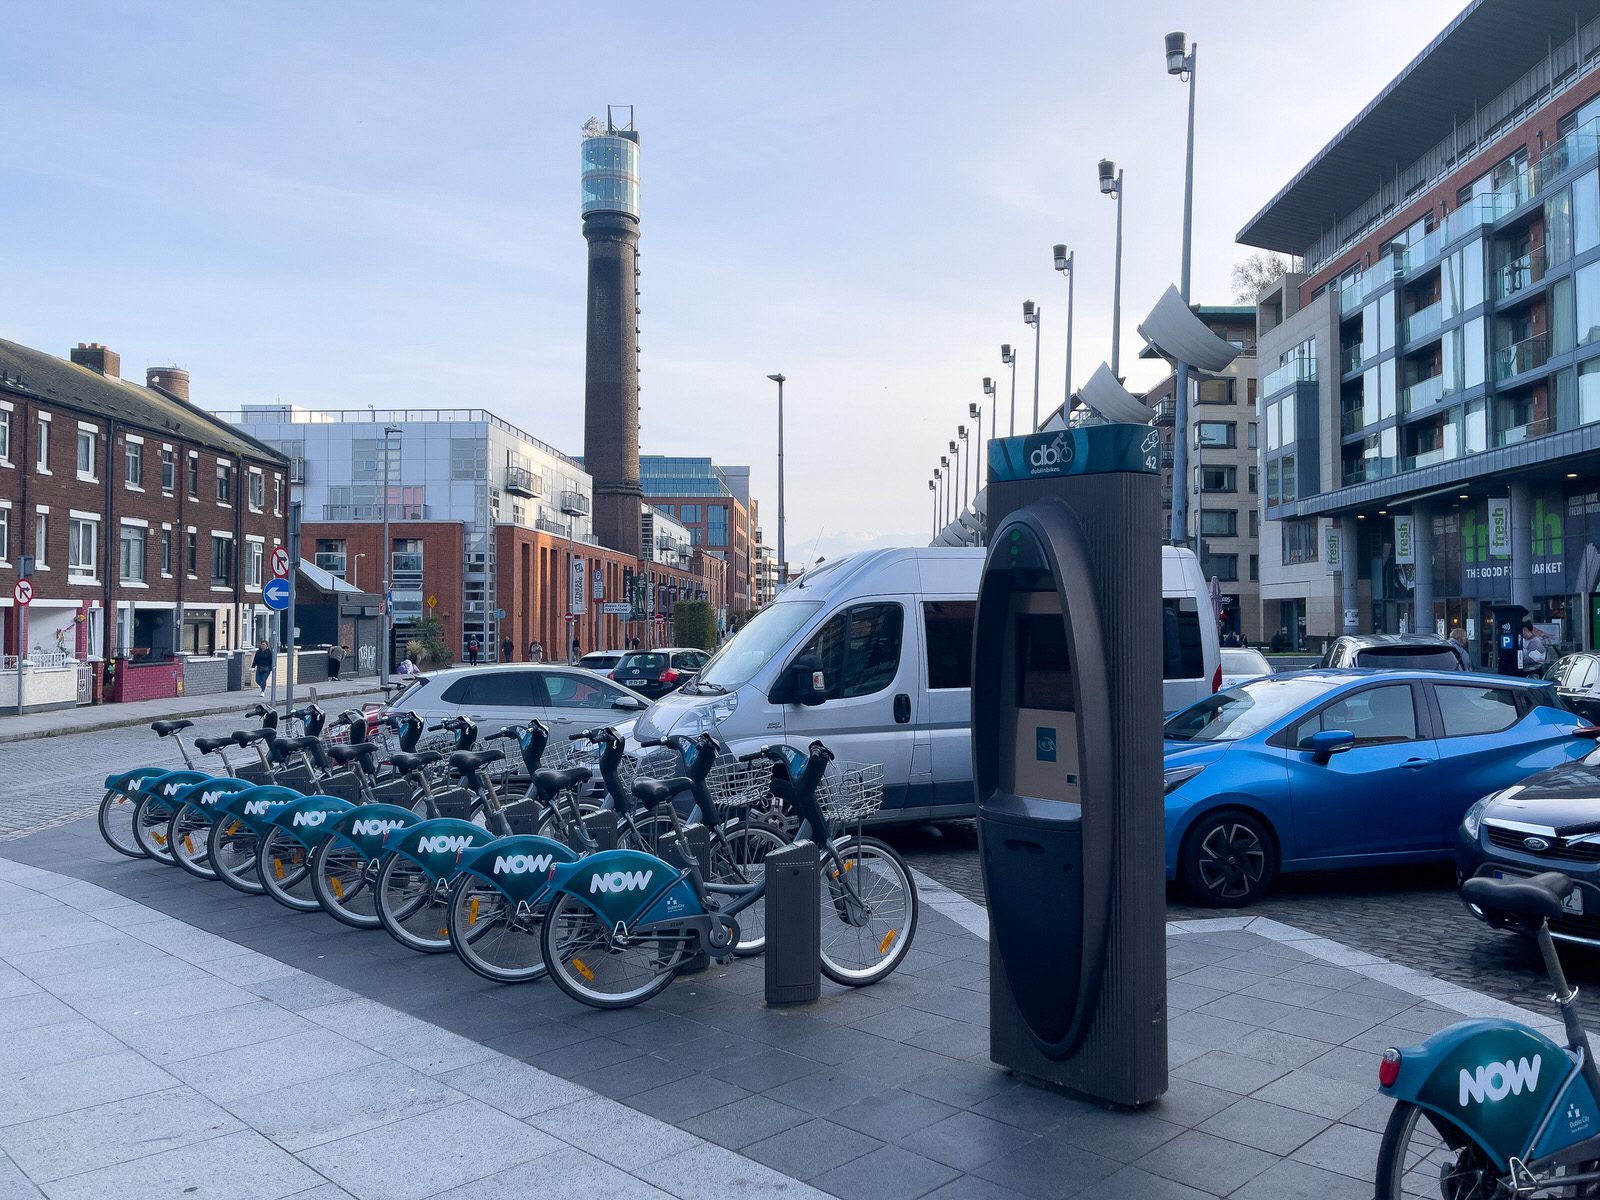 DUBLINBIKES DOCKING STATION 42 [SMITHFIELD PLAZA OR SQUARE - CHOOSE WHICH YOU PREFER] 005